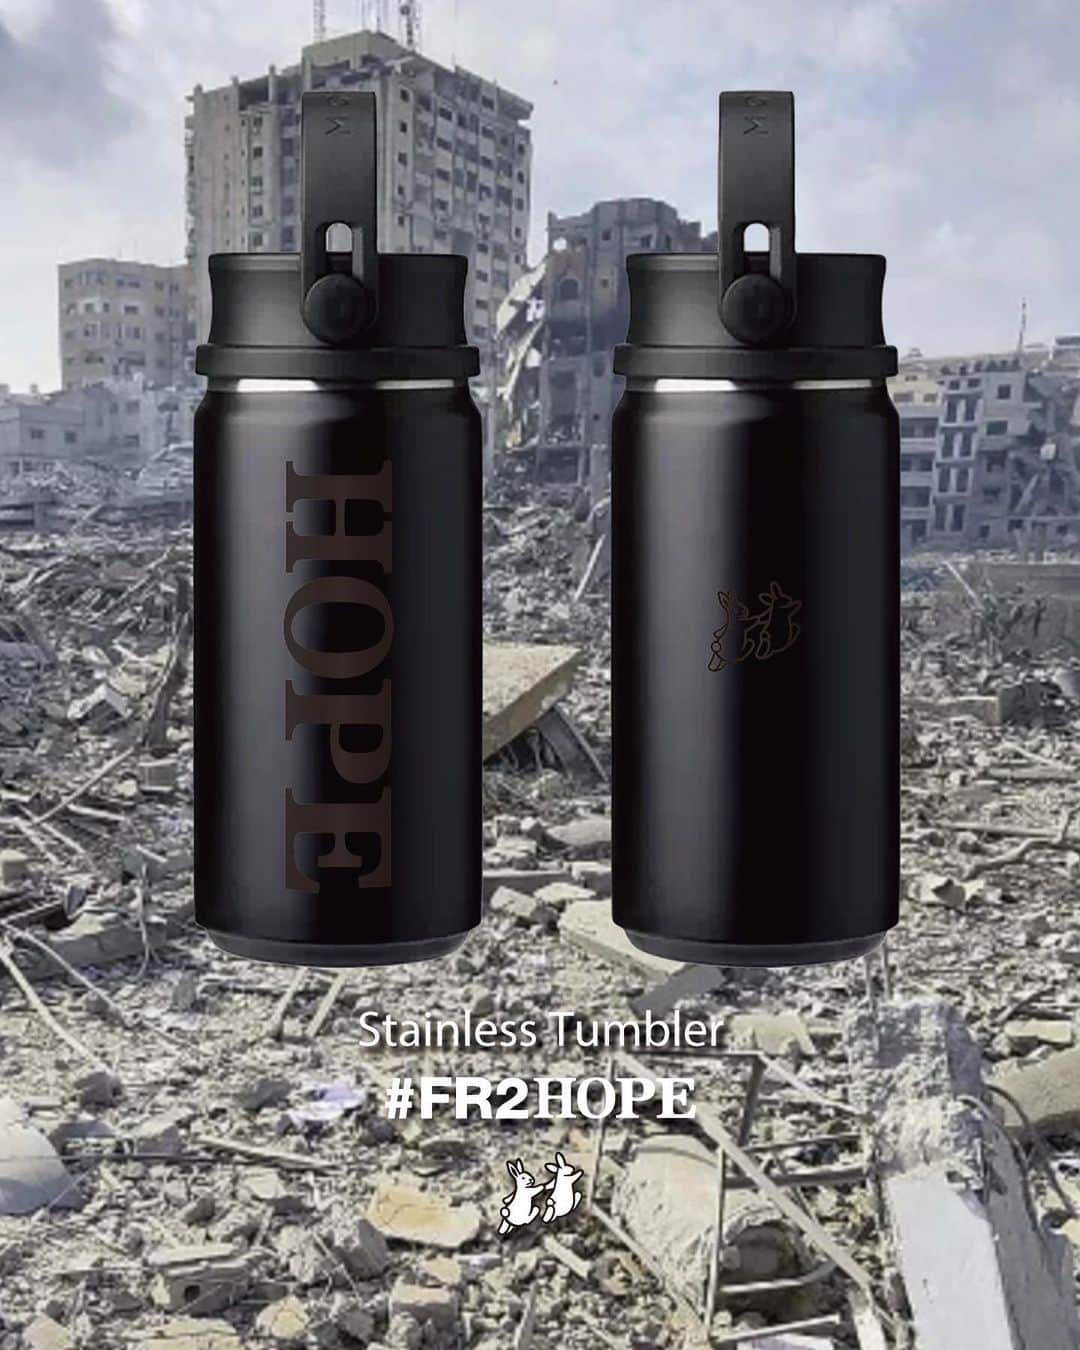 #FR2さんのインスタグラム写真 - (#FR2Instagram)「#FR2Hope As a project, we will provide support to the humanitarian crisis caused by the large-scale armed conflict between Israel and Palestine. Starting today, we will start accepting orders at the #FR2 Online Store. All proceeds from product sales, minus the costs involved in producing this project, will be donated to the Japanese Red Cross Society.  Order period: October 17th (Tuesday) to 23rd (Monday), 2023  #FR2希望 プロジェクトとして、イスラエル・パレスチナの大規模な武力衝突により発生した人道的危機への支援を行います。 本日から #FR2 Online Storeで受注販売を開始いたします。 こちらの企画の制作にかかわるコストを引いた商品の売上の全ては、日本赤十字社に寄付します。  受注期間：2023年10月17日（火）～23日（月）  #FR2Hope 作为一个项目，我们将为以色列和巴勒斯坦之间大规模武装冲突造成的人道主义危机提供支持。 从今天开始，我们将开始在 #FR2 在线商店接受订单。 产品销售的所有收益，减去制作该项目所涉及的成本，将捐赠给日本红十字会。  订购日期：2023年10月17日（星期二）至23日（星期一）  #FR2Hope 作為一個項目，我們將為以色列和巴勒斯坦之間大規模武裝衝突造成的人道主義危機提供支持。 從今天開始，我們將開始在 #FR2 線上商店接受訂單。 產品銷售的所有收益，減去製作該項目所涉及的成本，將捐贈給日本紅十字會。  訂購日期：2023年10月17日（星期二）至23日（星期一）  #FR2希望　#FR2HOPE」10月17日 18時59分 - fxxkingrabbits